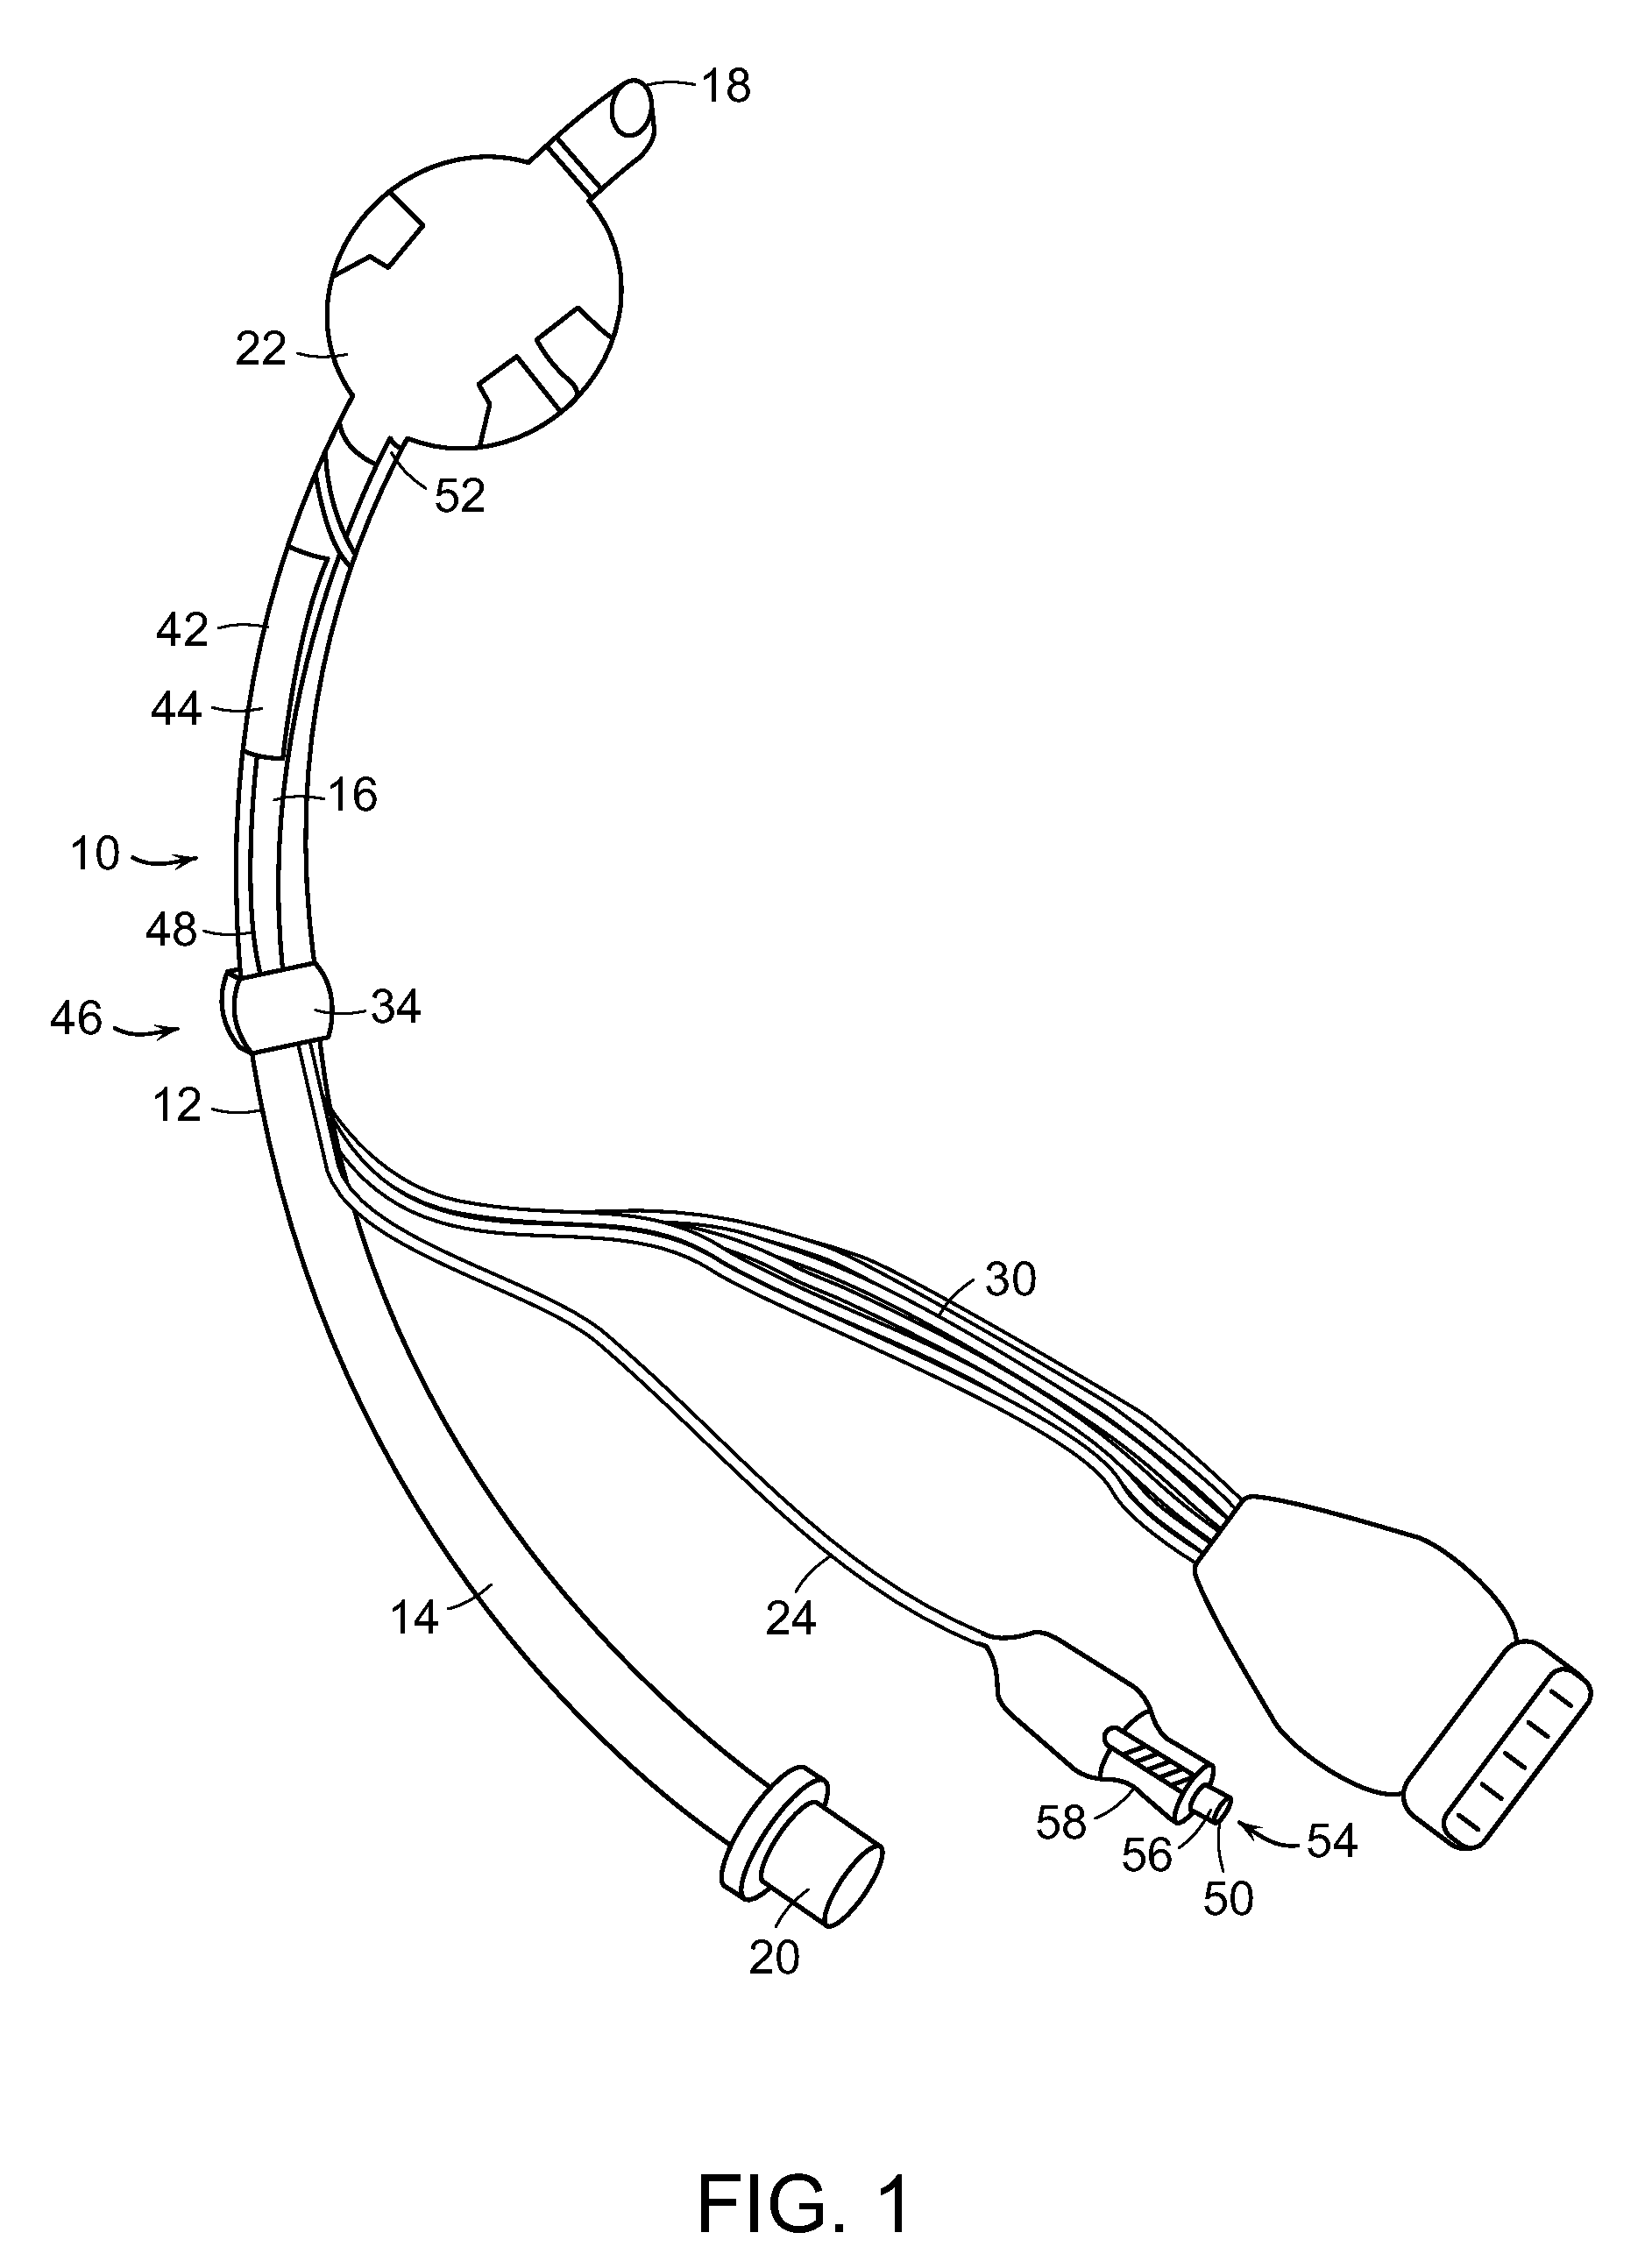 Apparatus and Methods for the Measurement of Cardiac Output